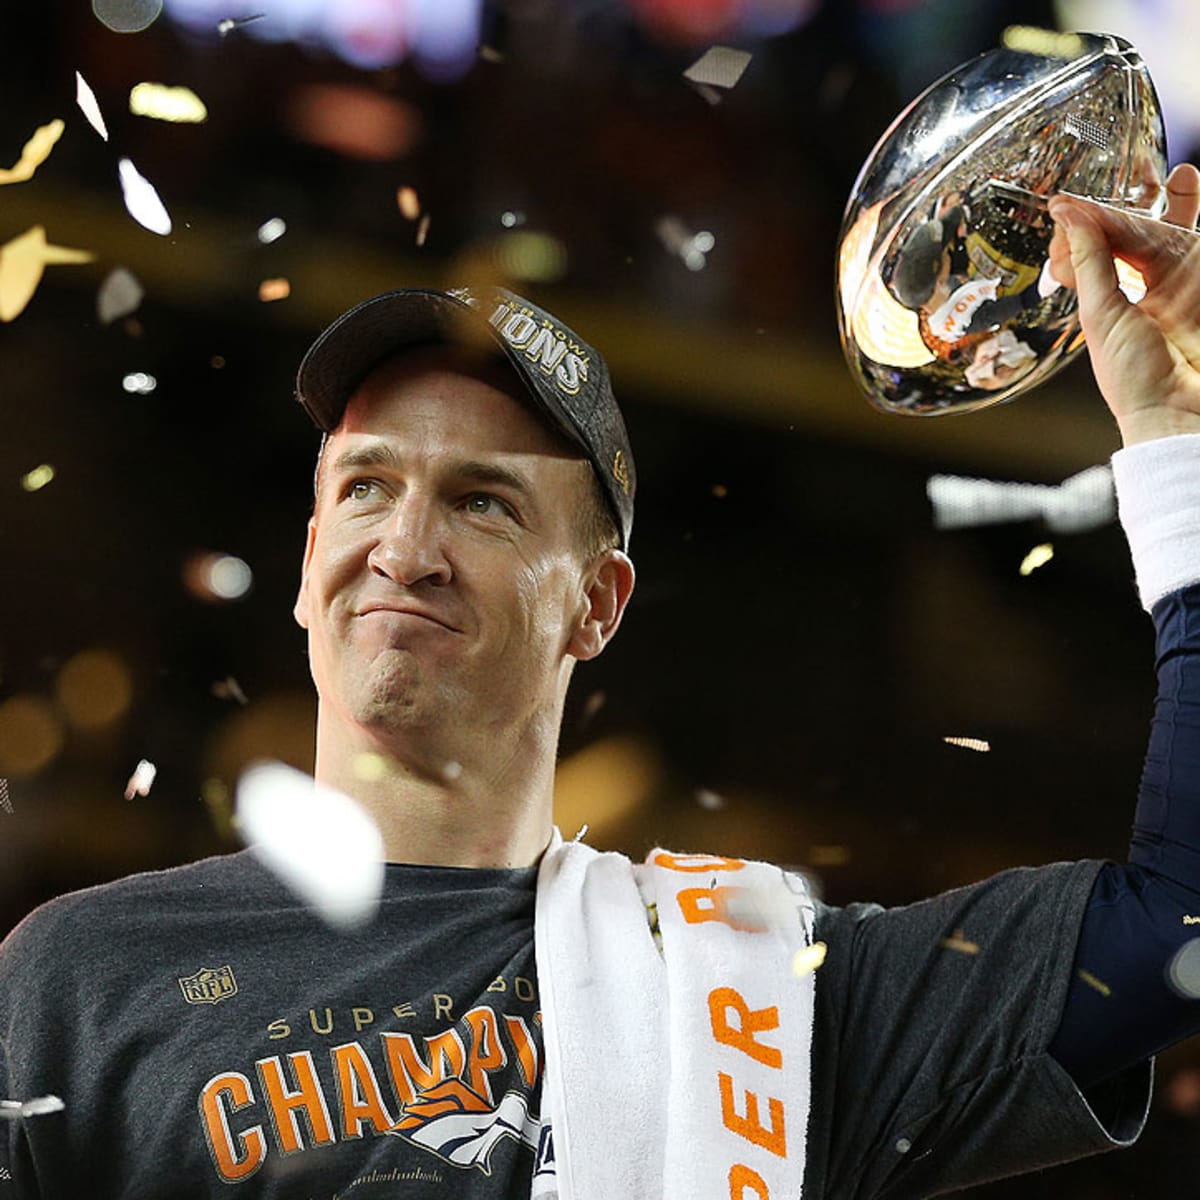 Eli Manning looks far from impressed as brother Peyton wins Super